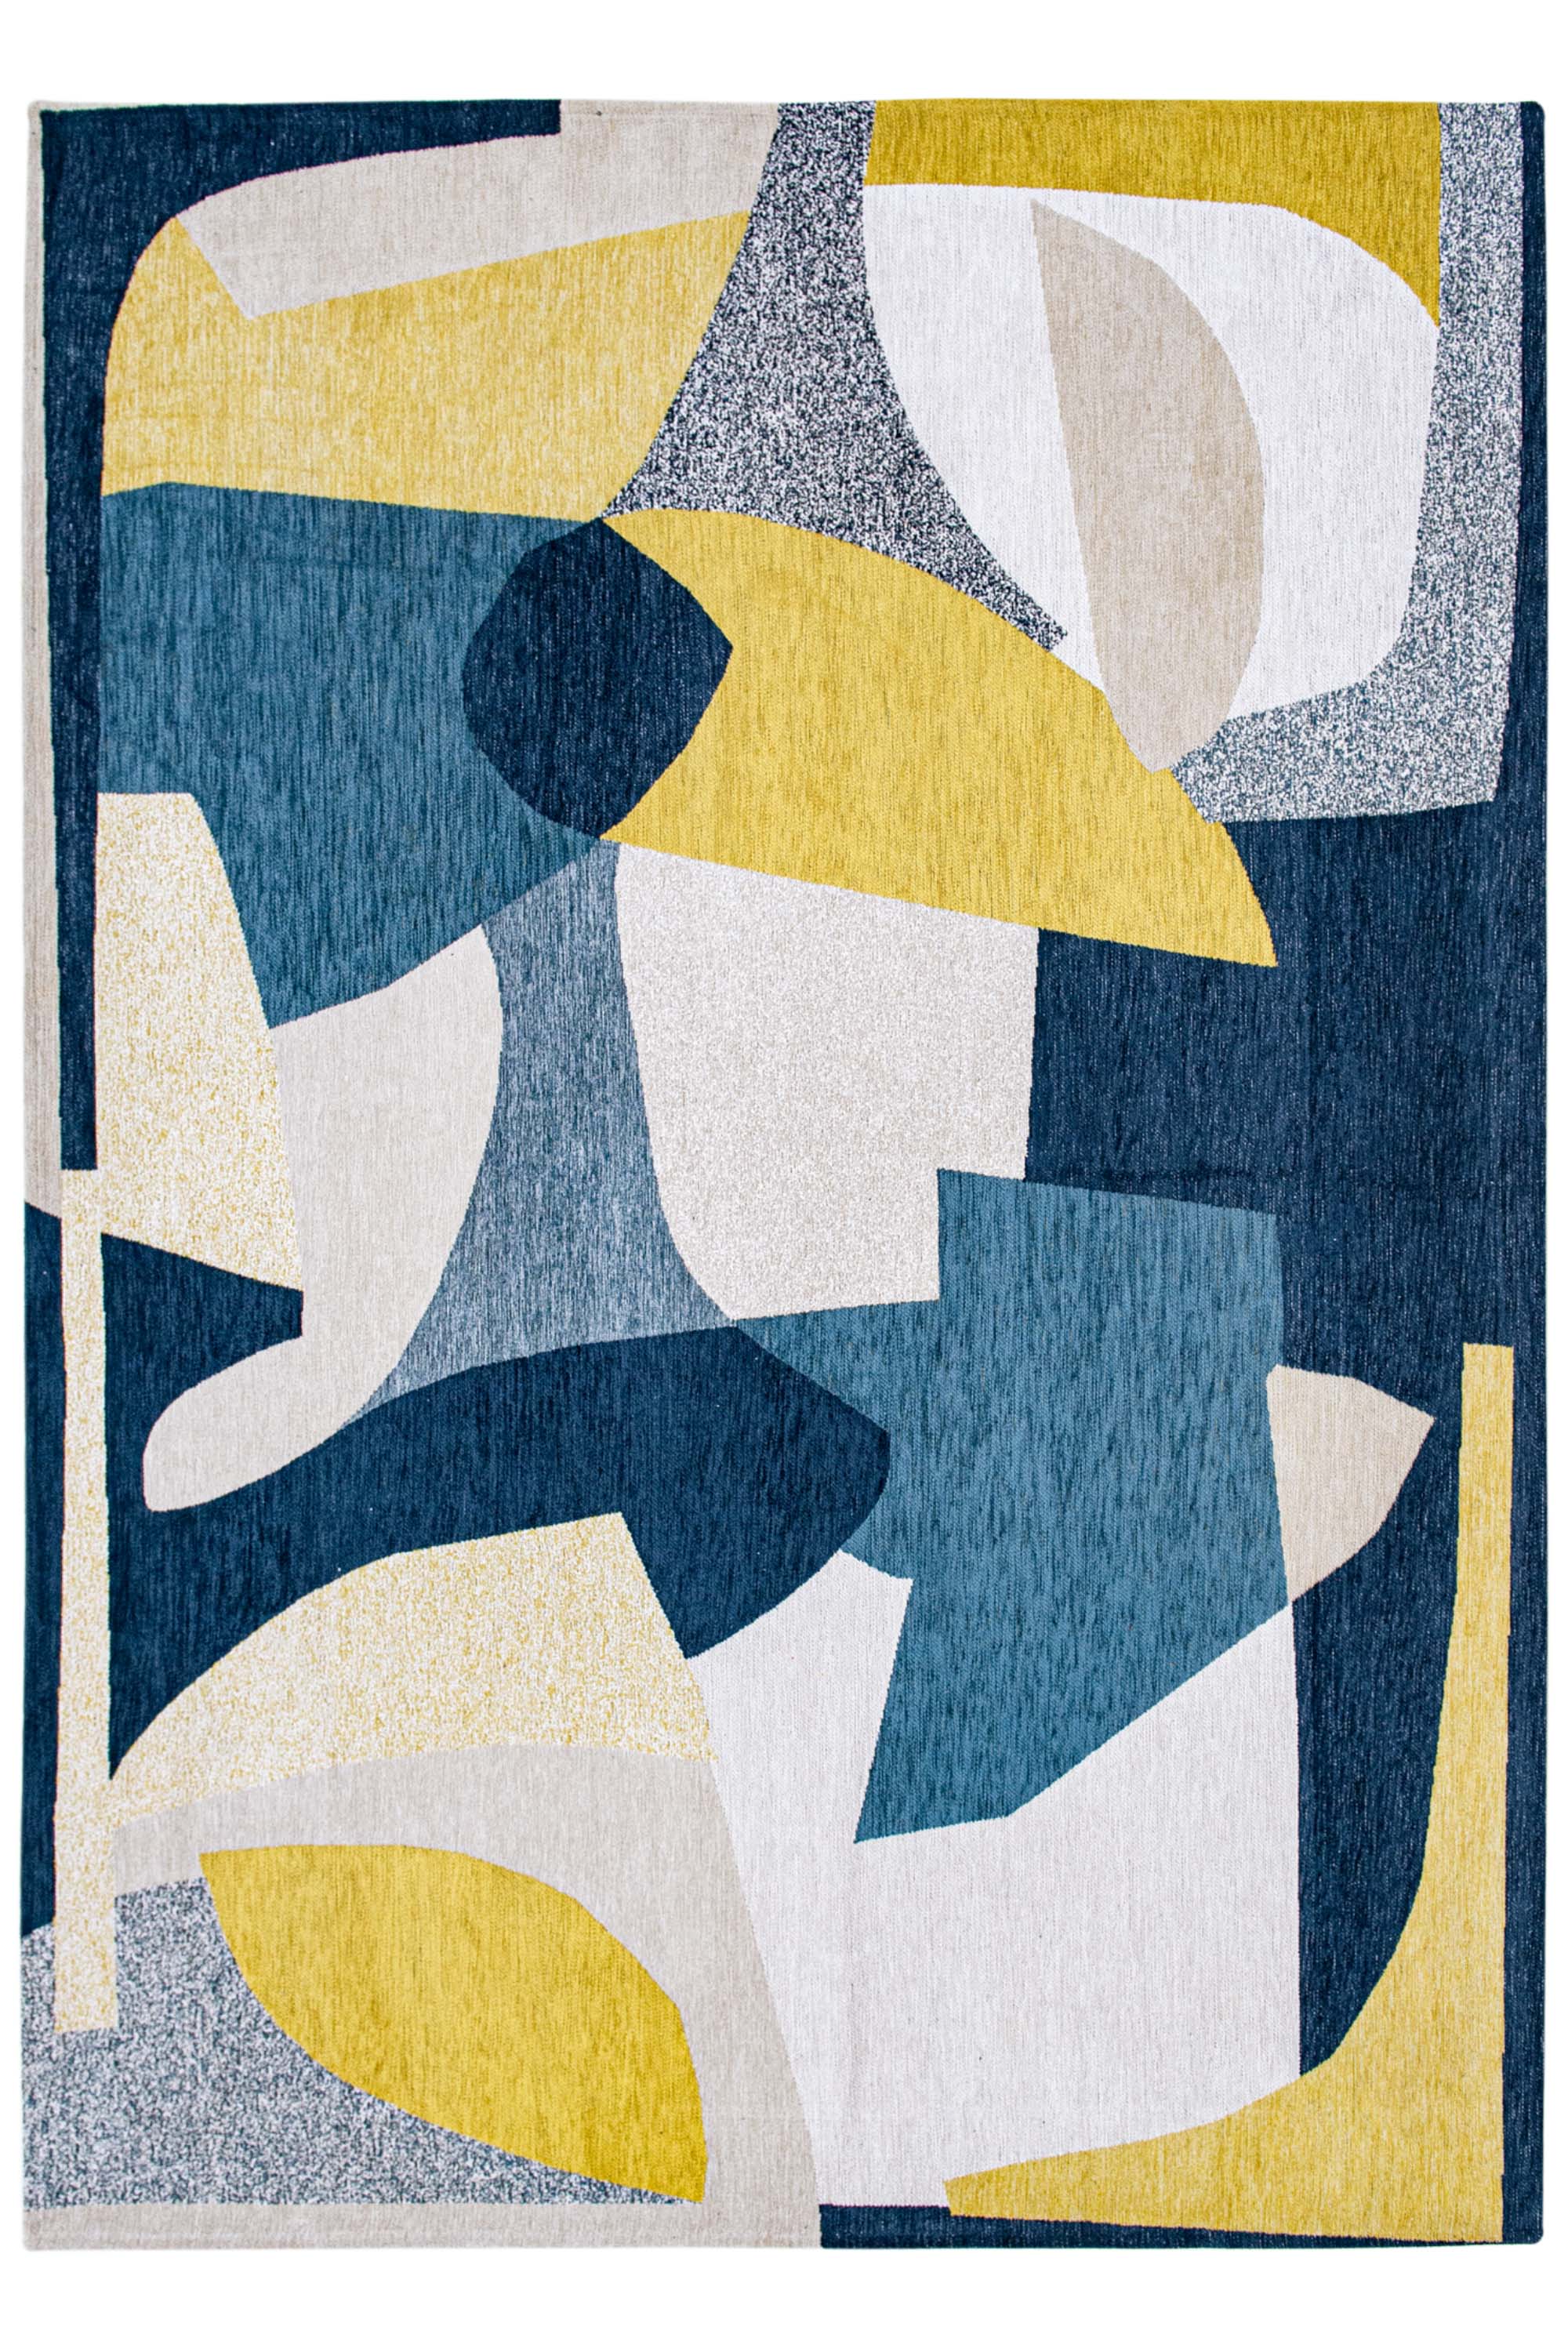 Modern rug with blue and yellow abstract pattern